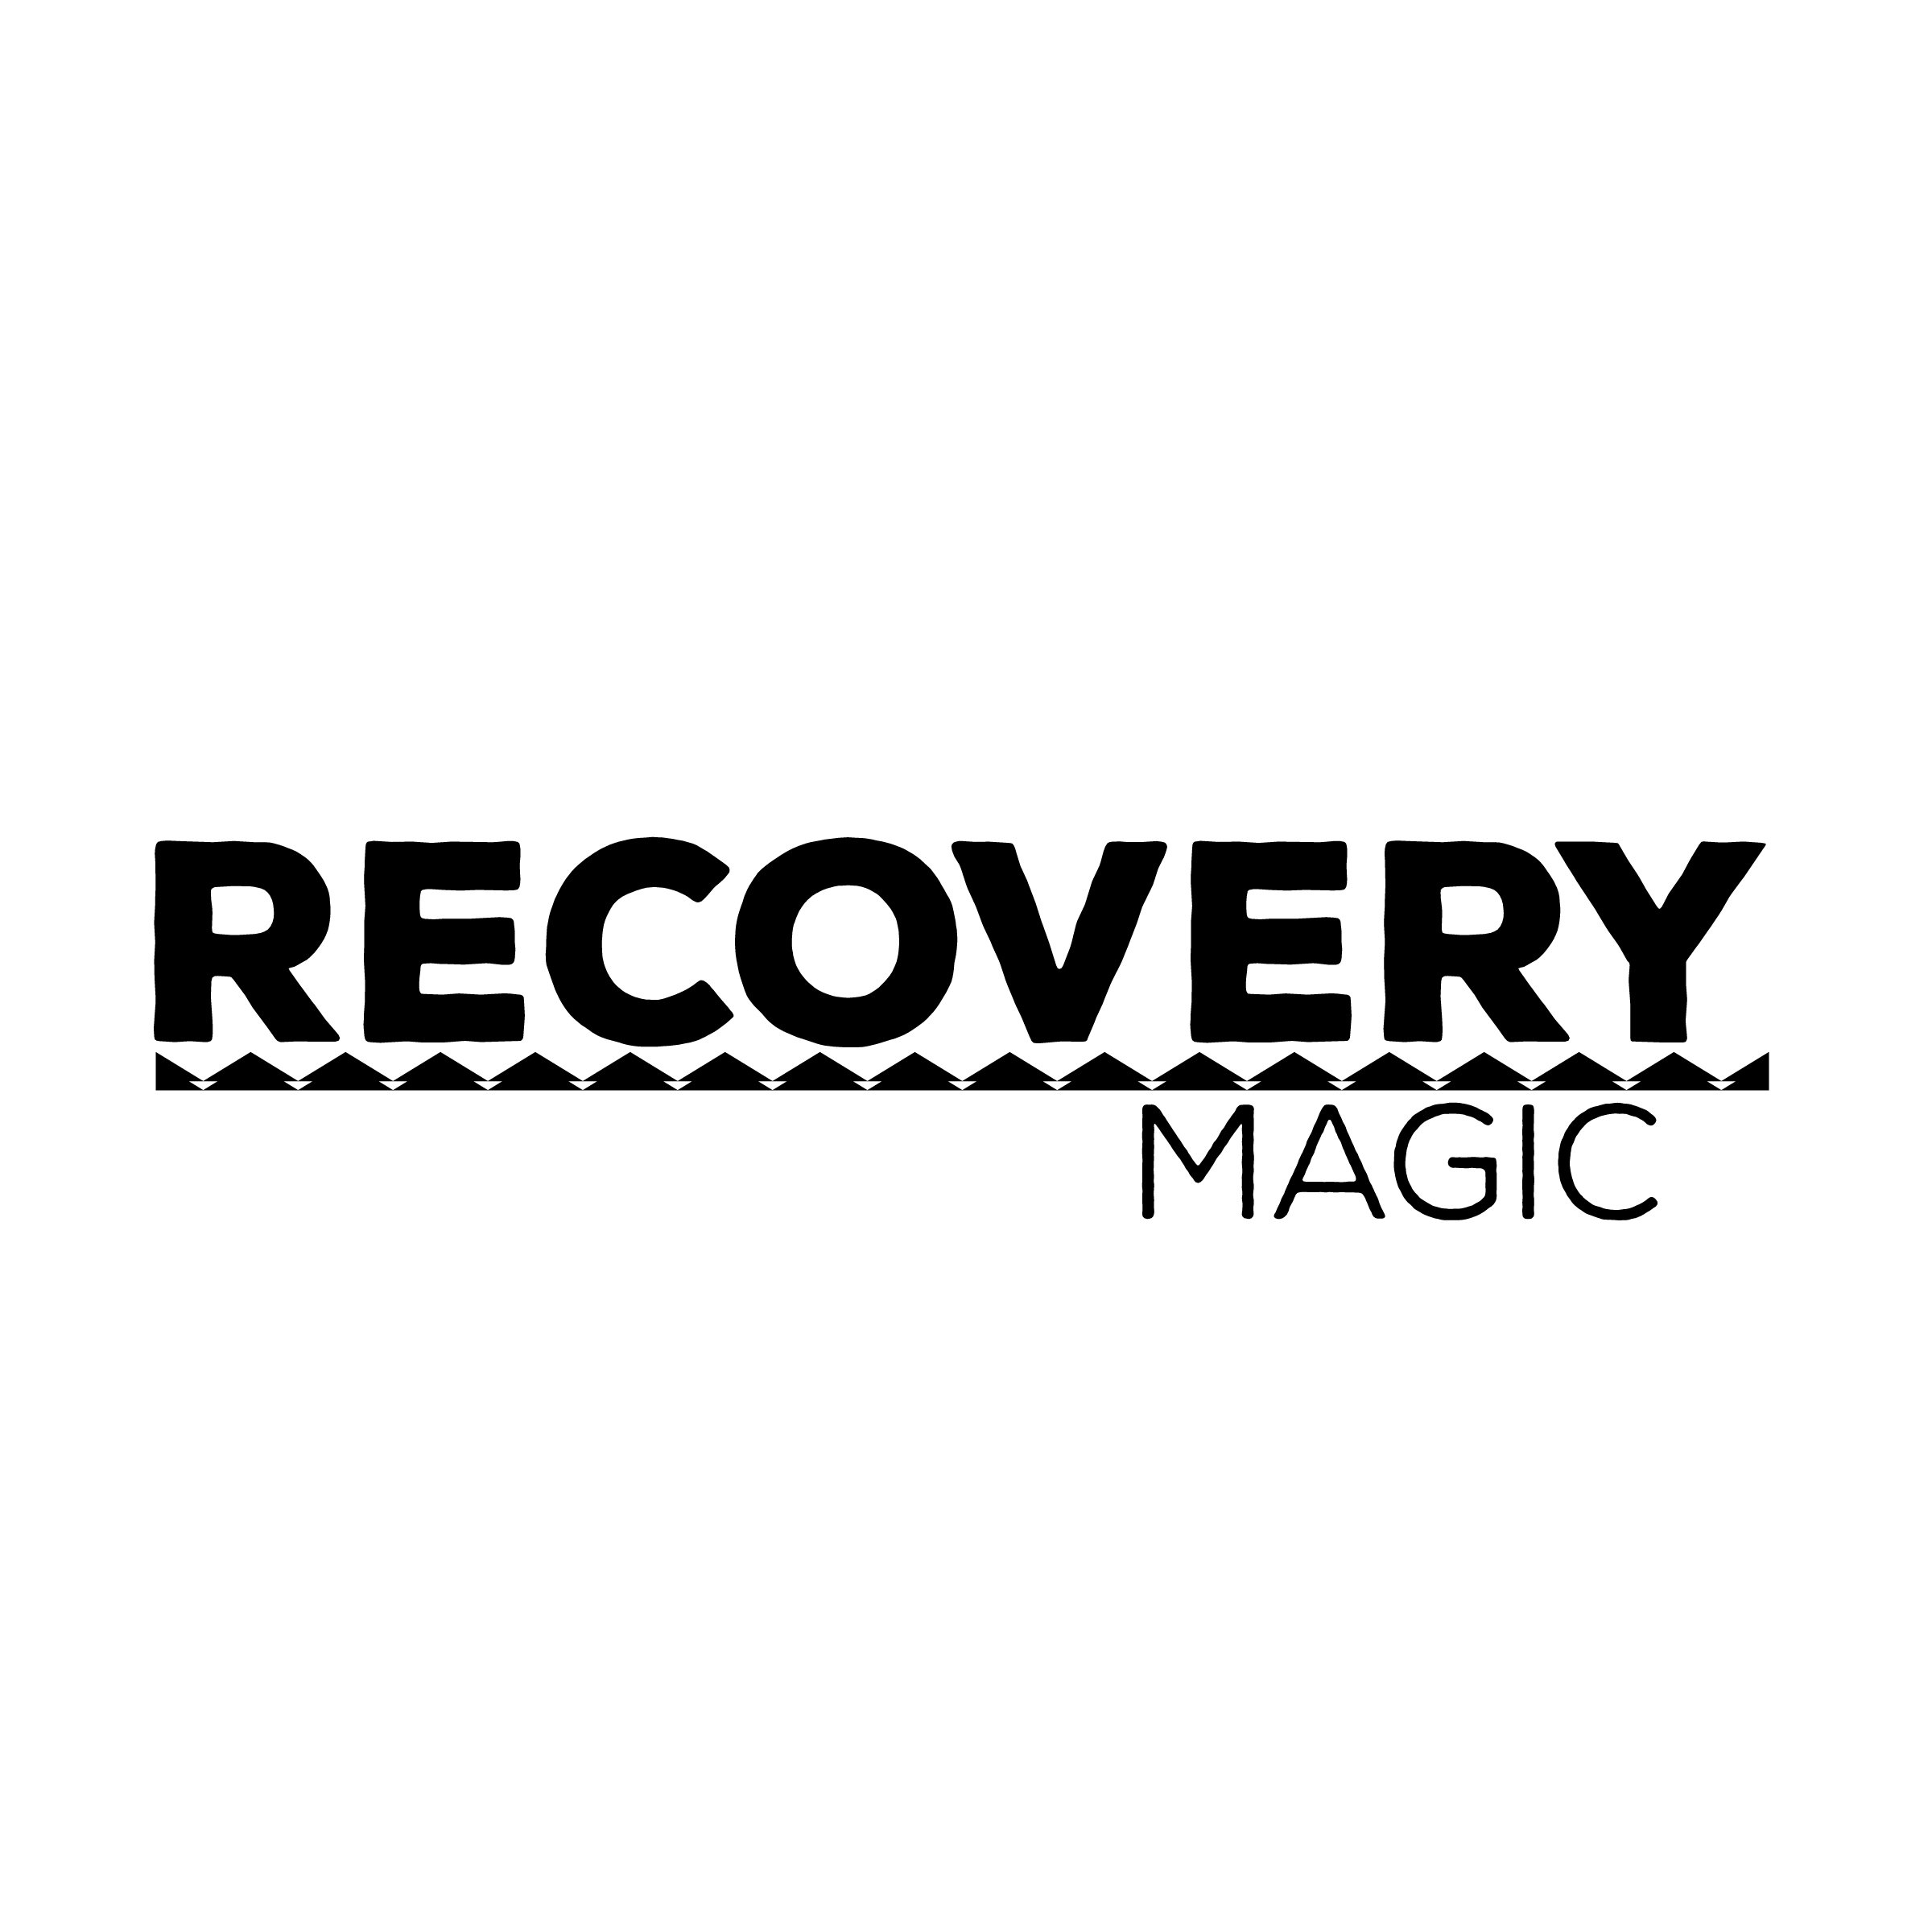  RECOVERY MAGIC